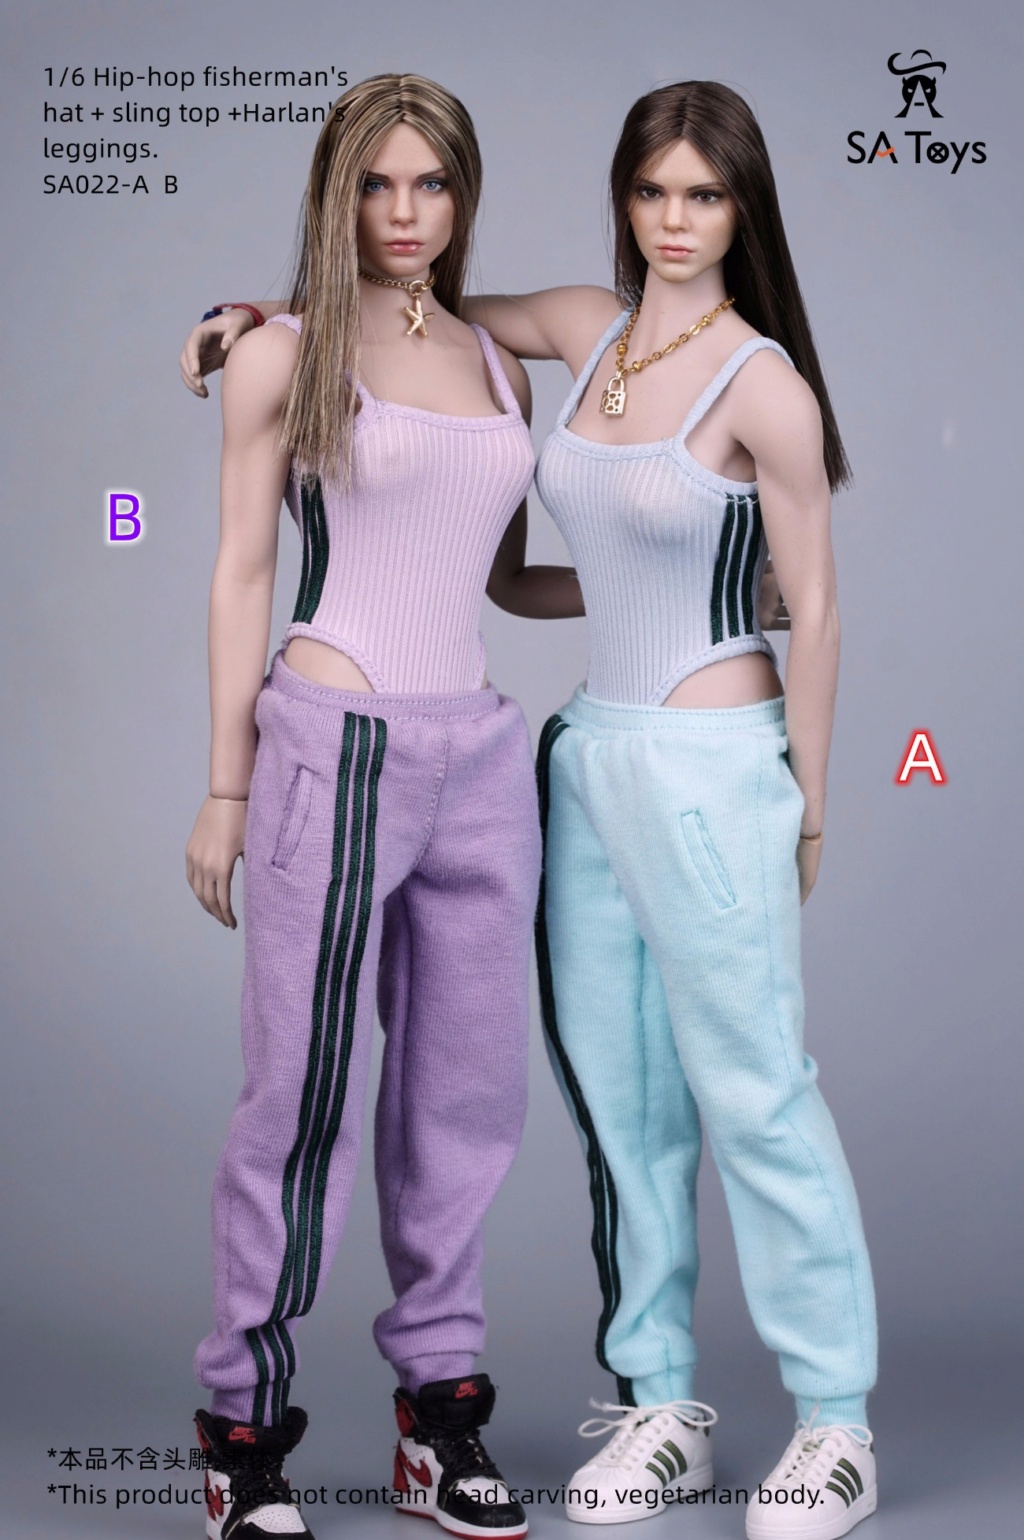 SAToys - NEW PRODUCT: SA Toys: 1/6 hip skirt / floral elastic skirt / fashionable sports style hooded sweater cover, hip-hop fisherman hat halter and footwear casual pants [variety optional] 21403110